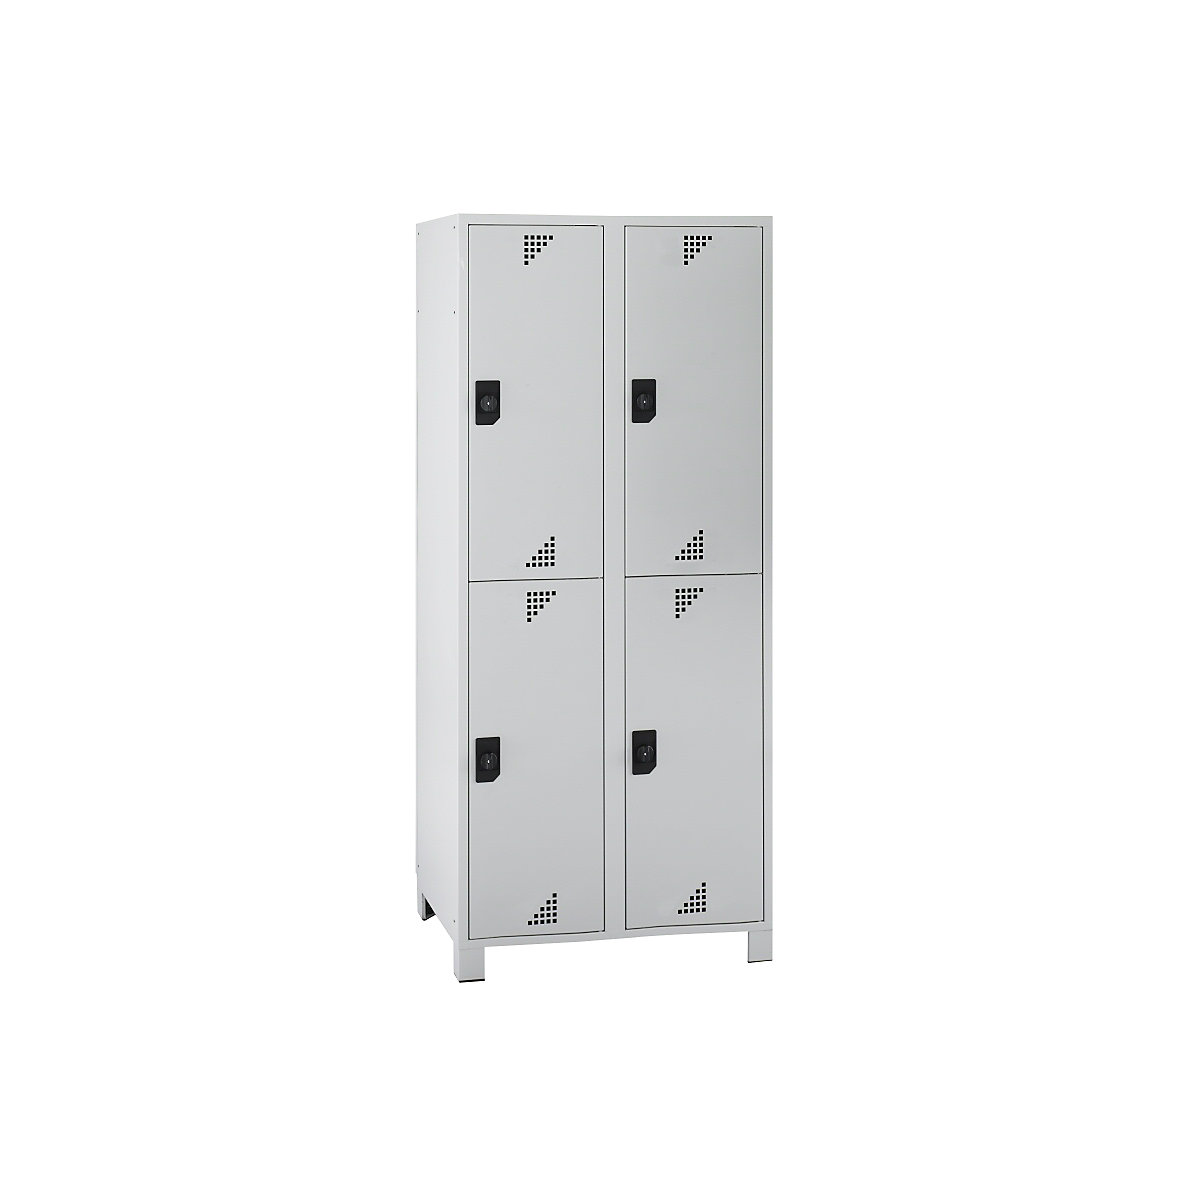 Cloakroom locker with half-height compartments – eurokraft pro, HxWxD 1800 x 800 x 500 mm, 4 compartments, completely light grey-6